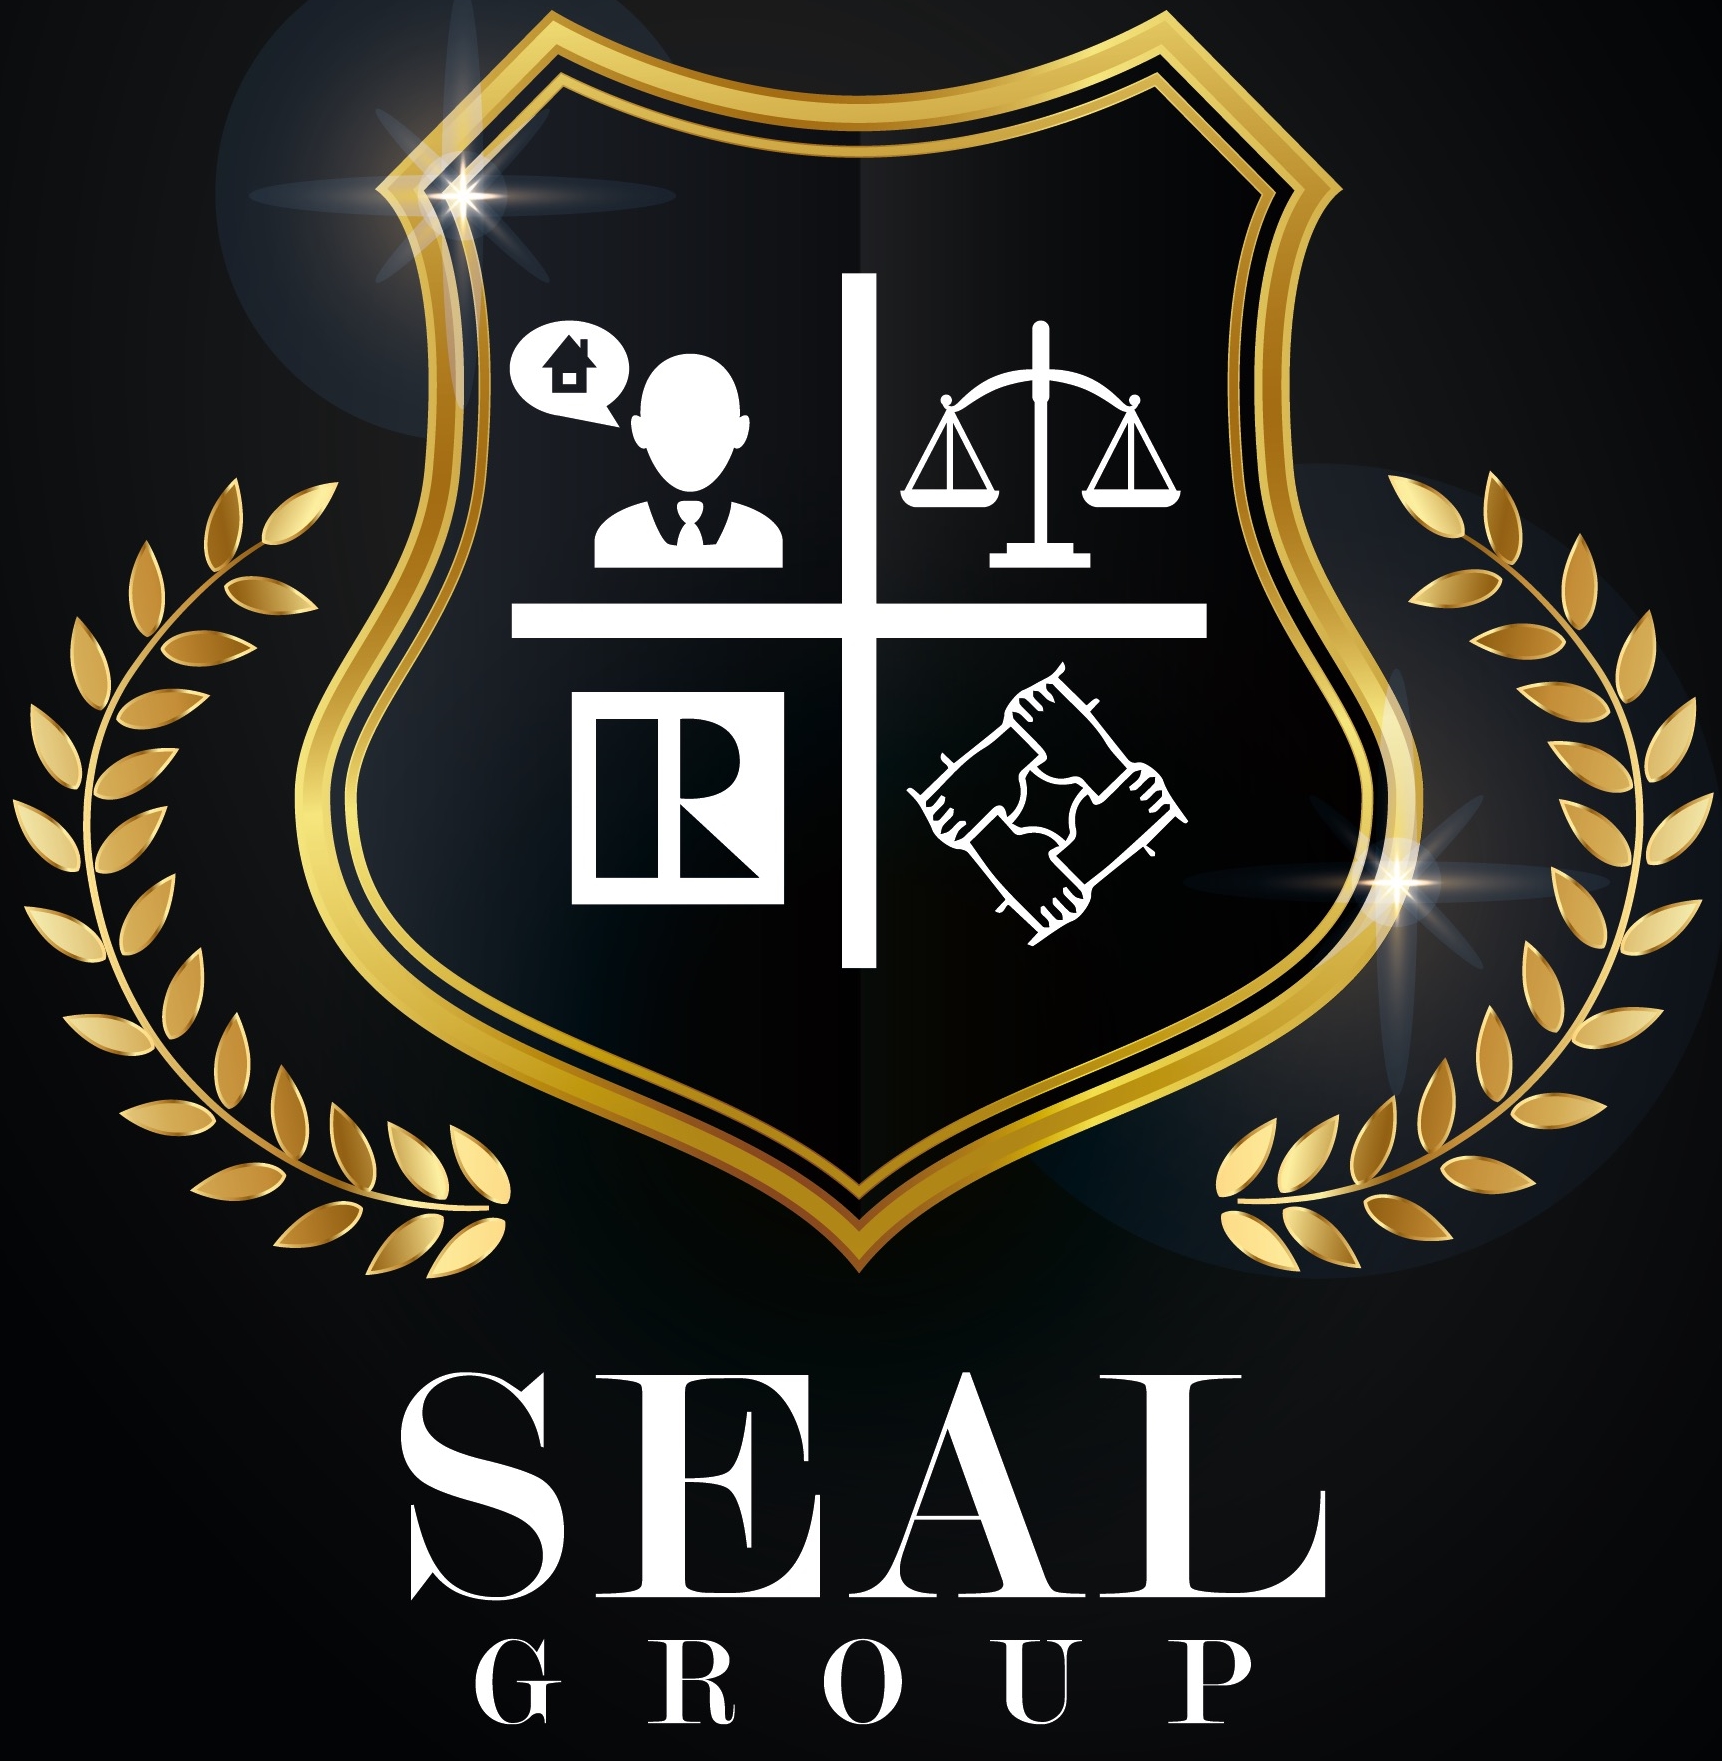 The SEAL Group